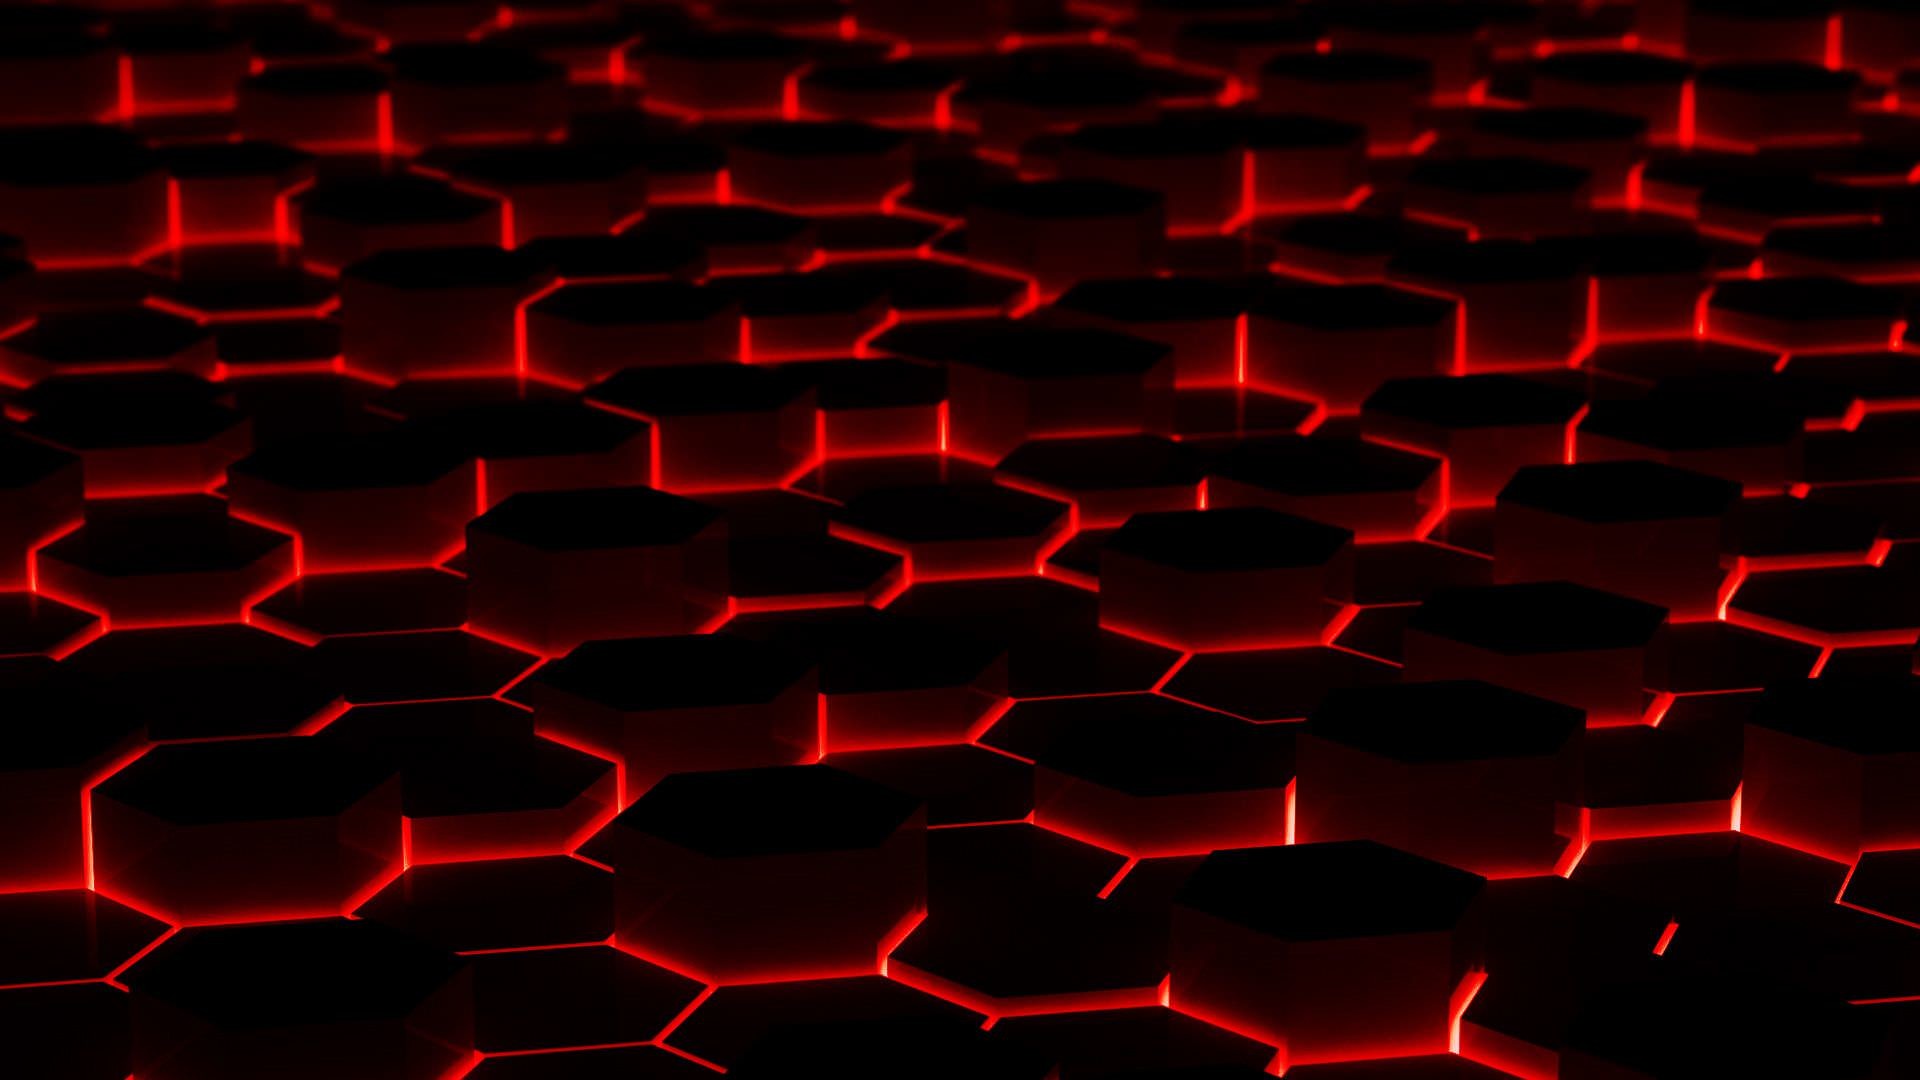 Red & Blaack Abstract Wallpaper Download Button